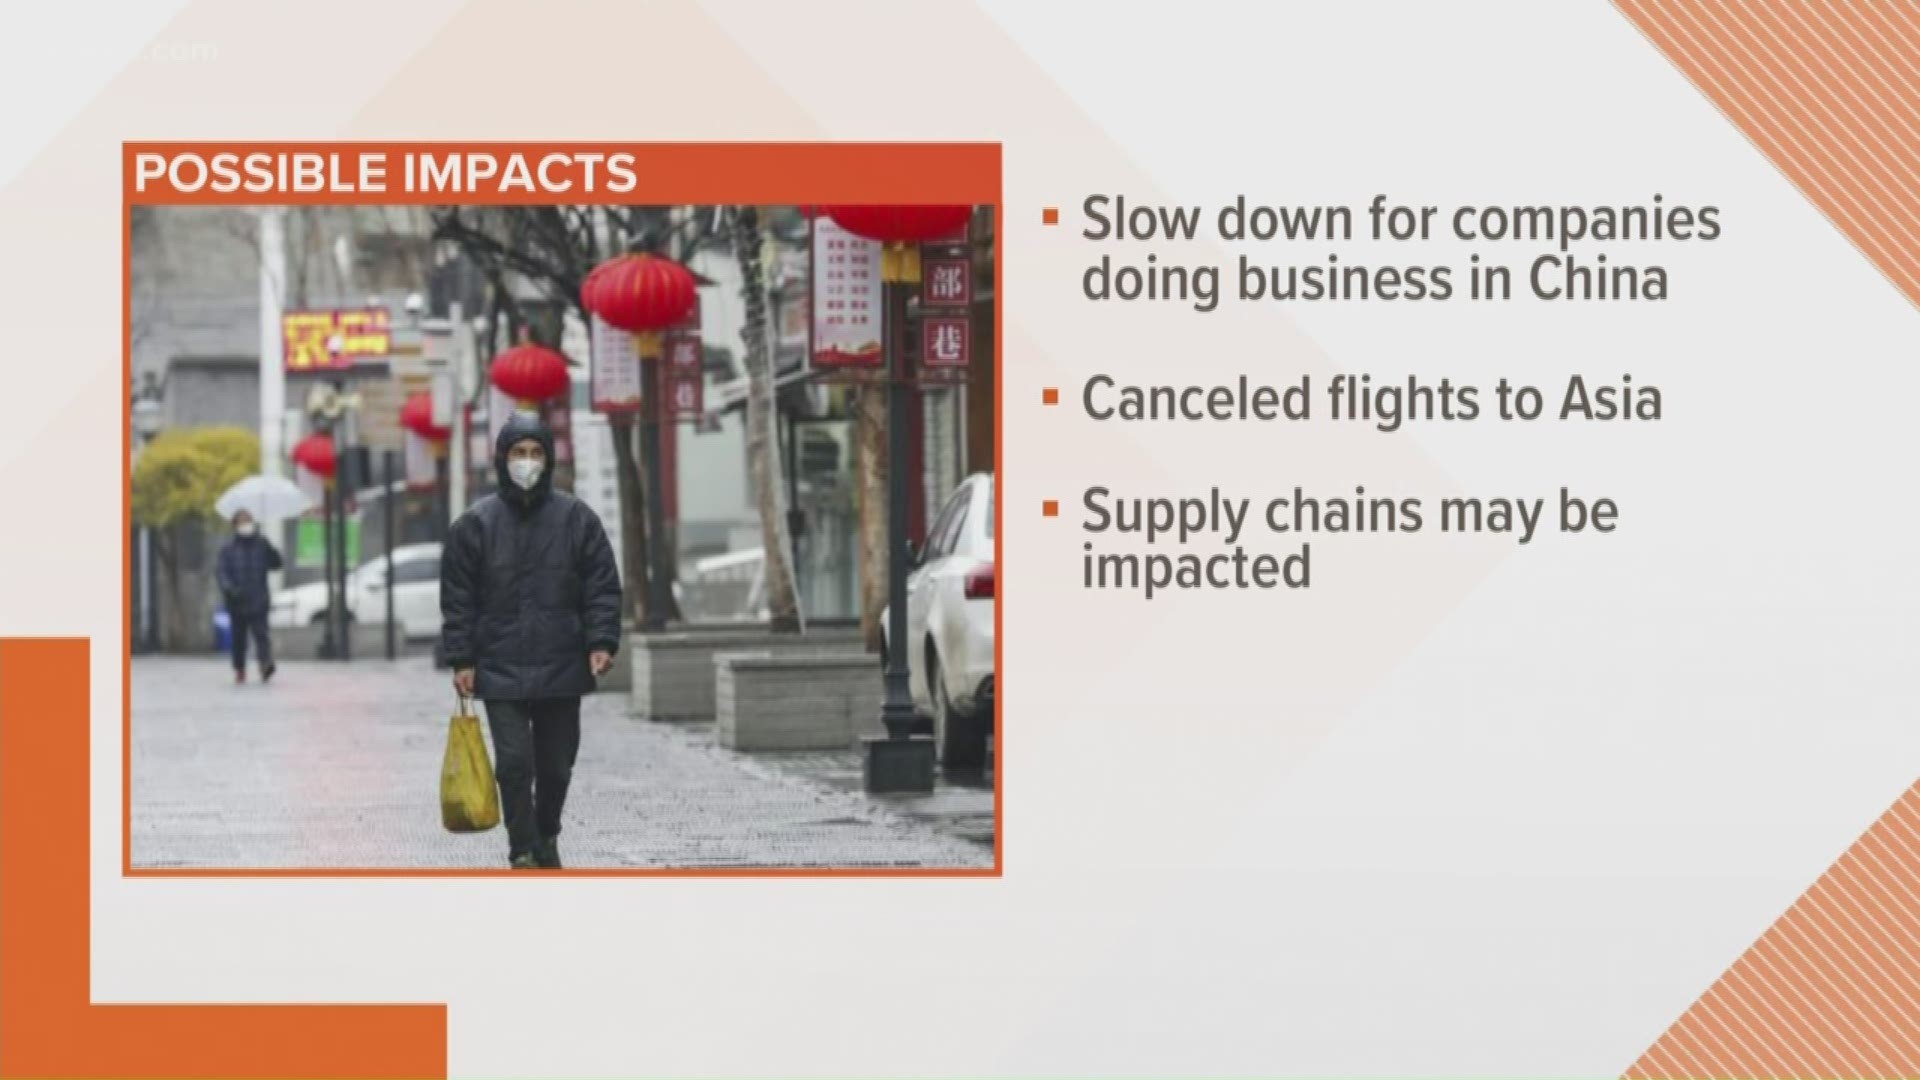 Airlines have canceled flights and the supply of products from China could also be disrupted amid concerns over the new virus strain.